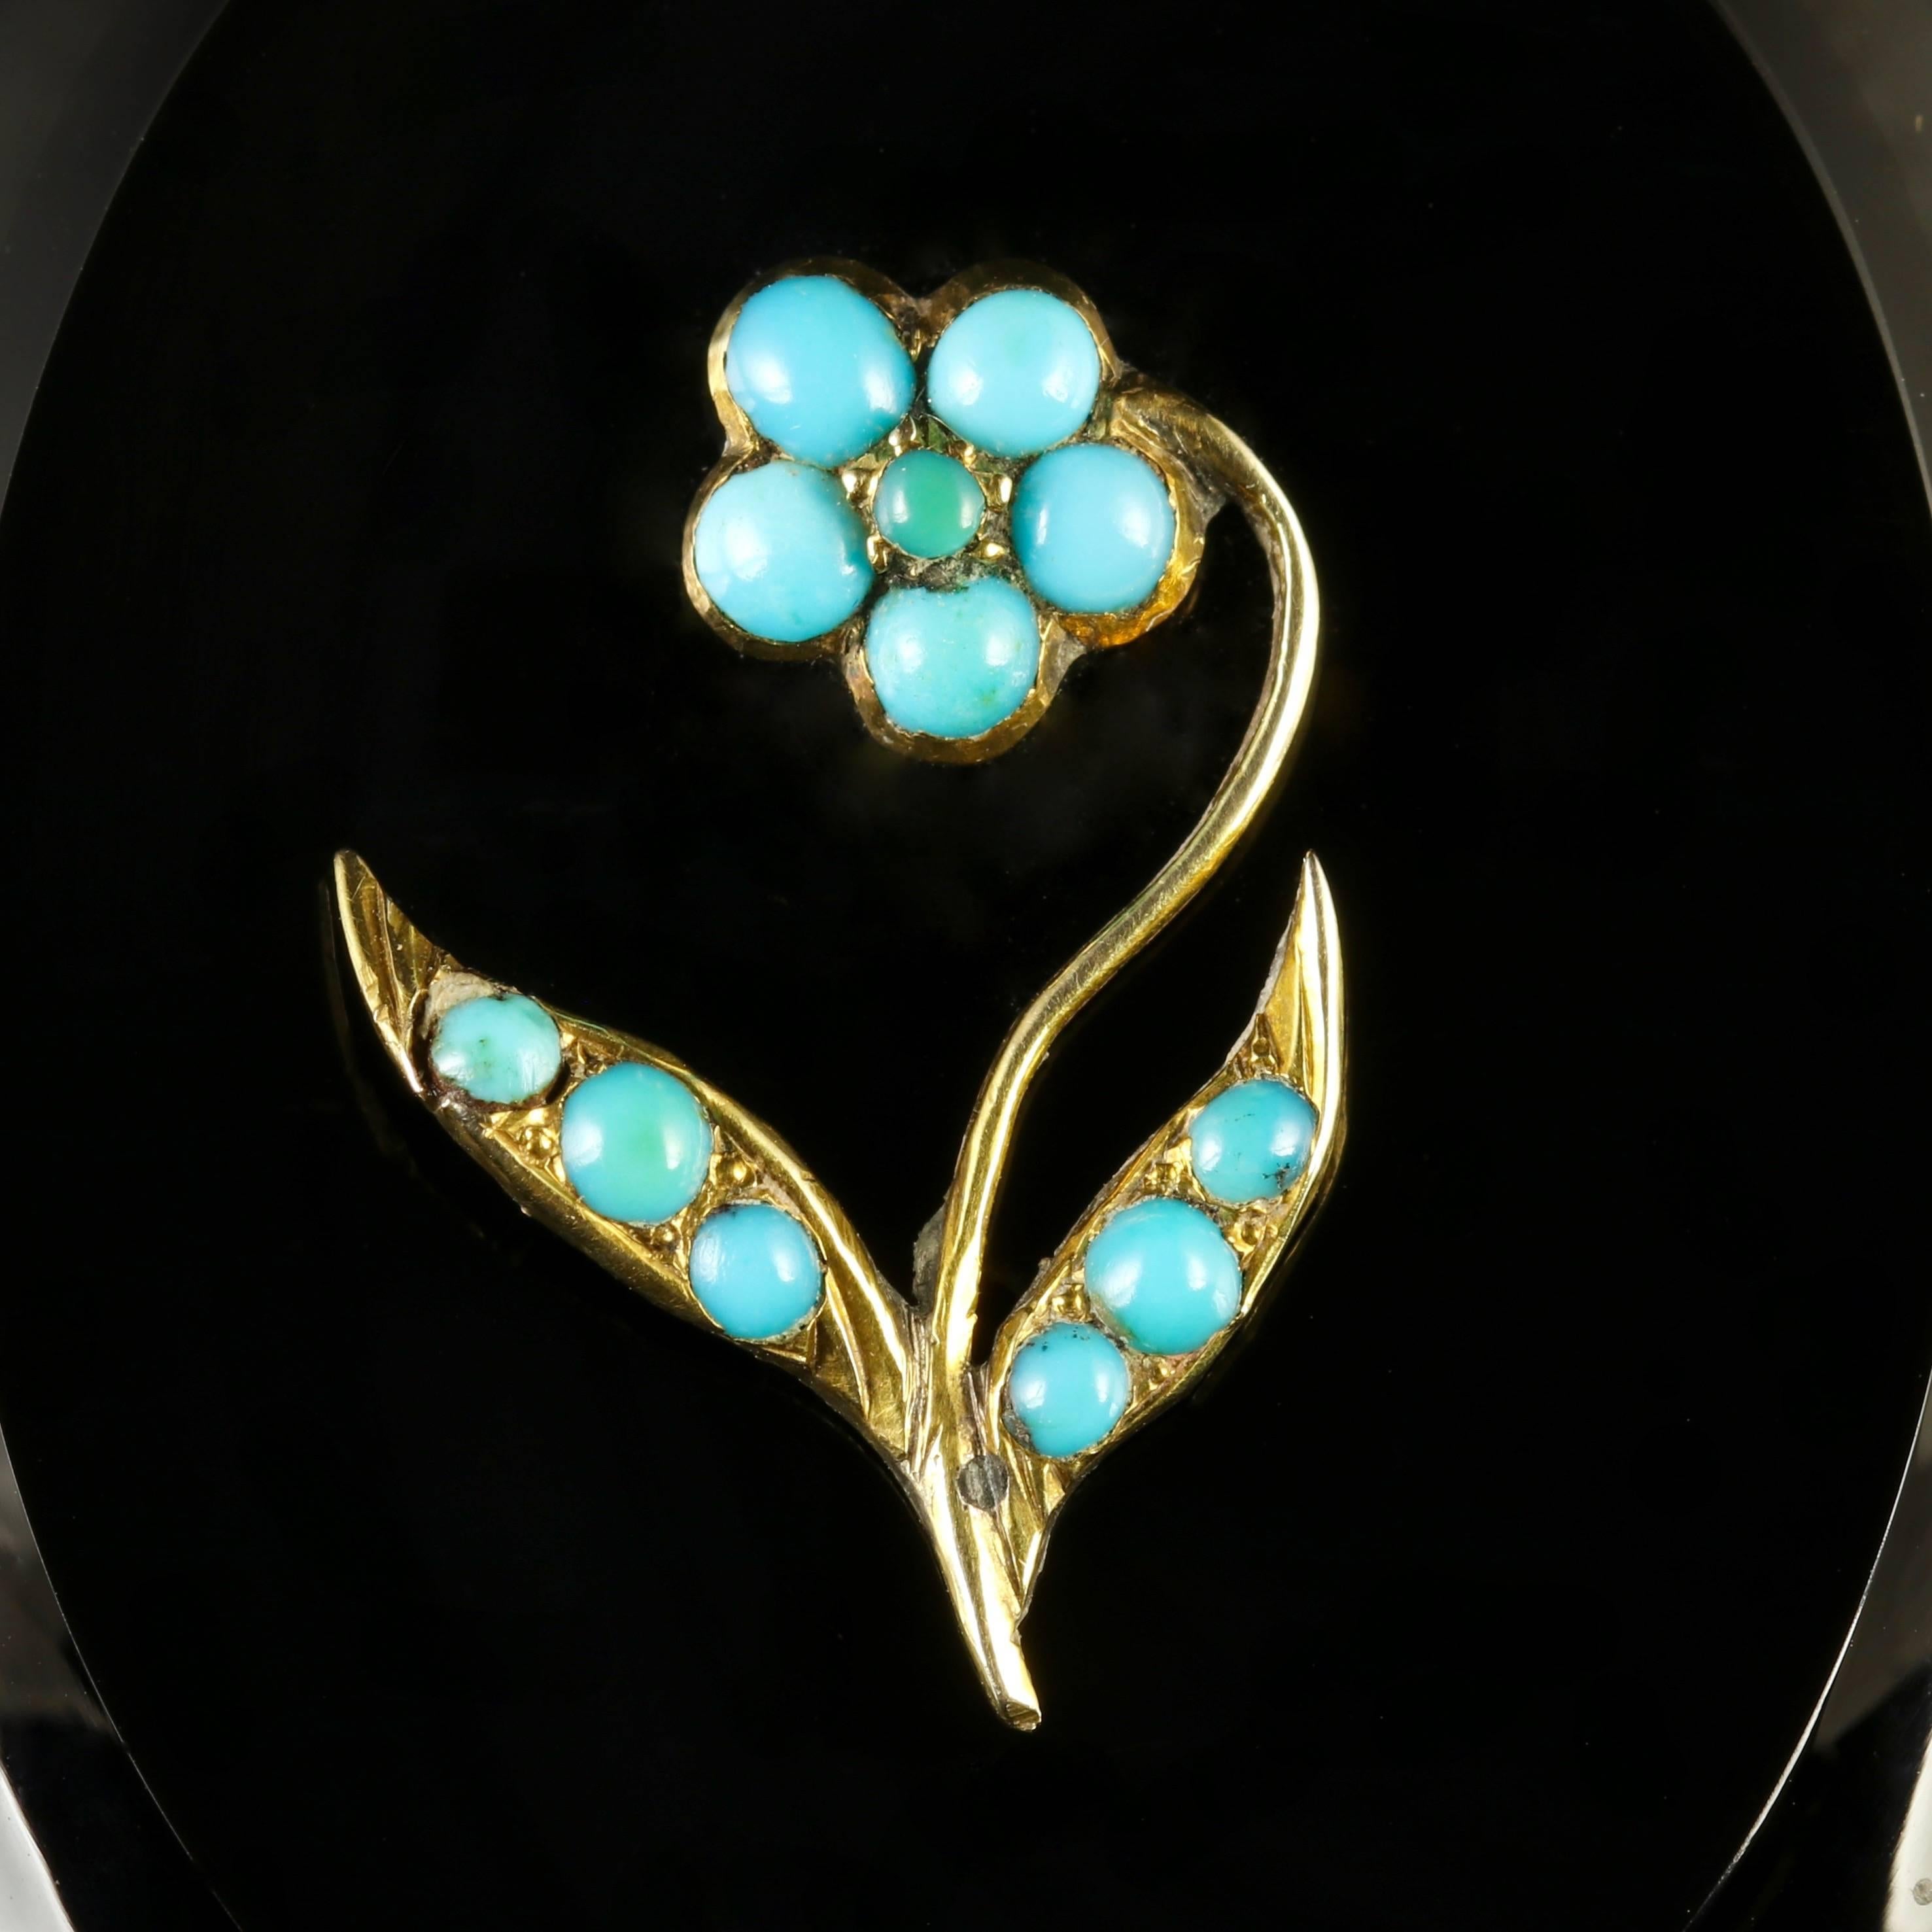 This genuine Victorian French Jet locket is adorned with a forget me not on the front which is adorned with Turquoise’s.

Genuine Victorian, Circa 1850.

French Jet is a type of black glass used to simulate the beauty of Jet. It became popular